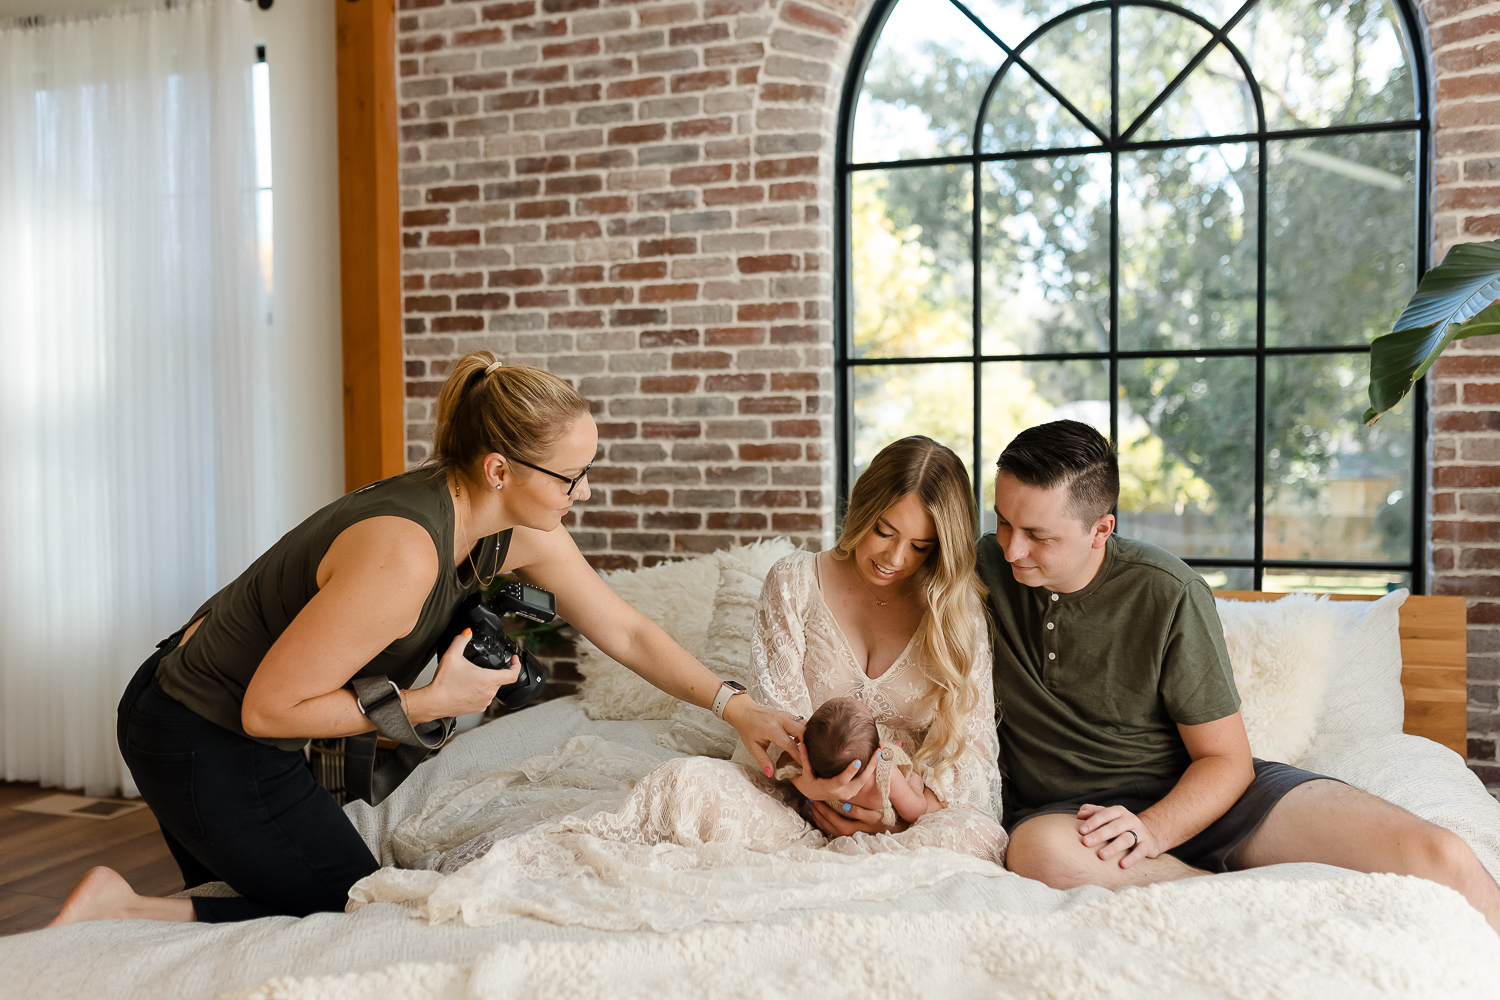 Newborn photography educator, Paige McLeod captures precious family moments with a newborn baby in a the Glean and Co Studio setting with a brick wall and arched window.